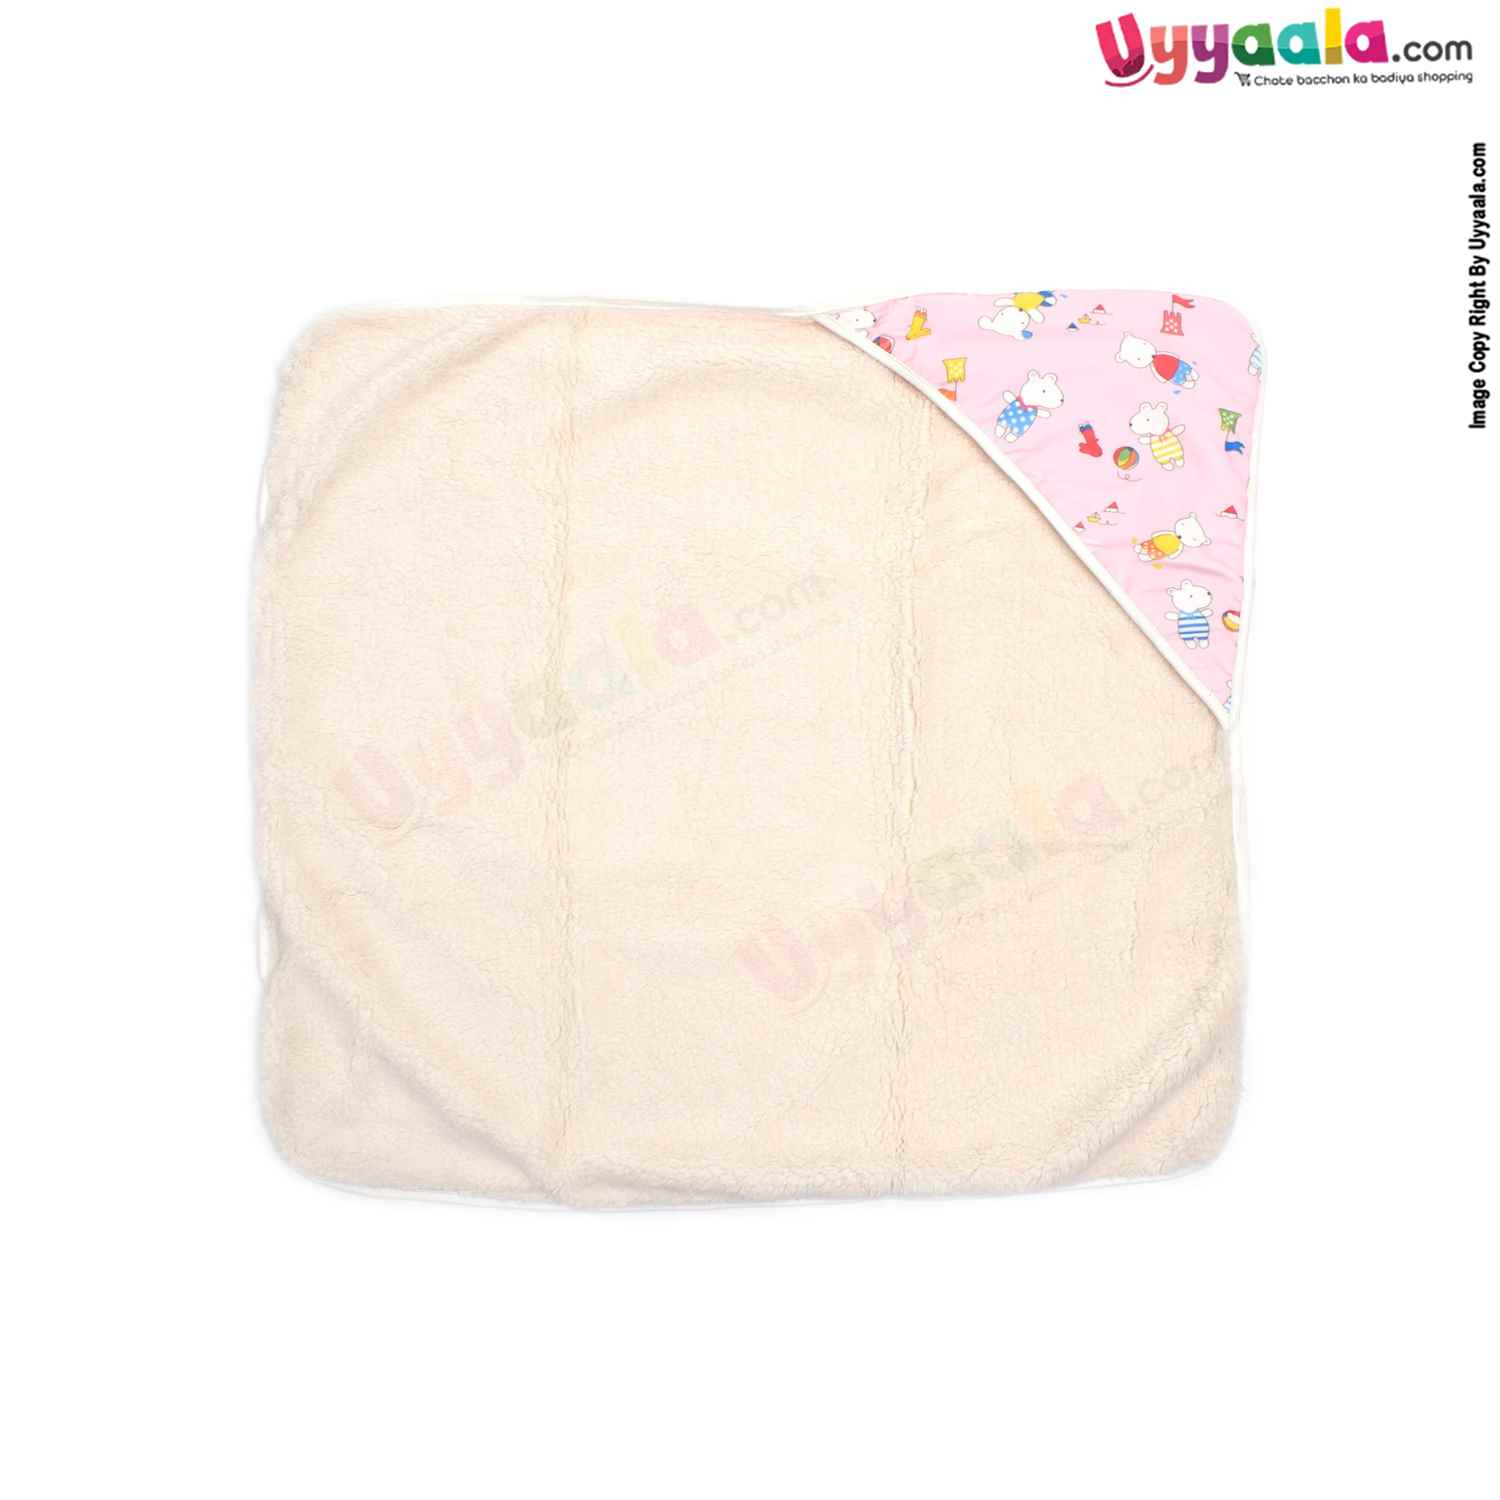 Double Layered (2 Ply) Hooded Blanket One Side Fur & Another Side Velvet with Animals Print for Babies 0-24m Age, Size(74*74cm)- Light Pink